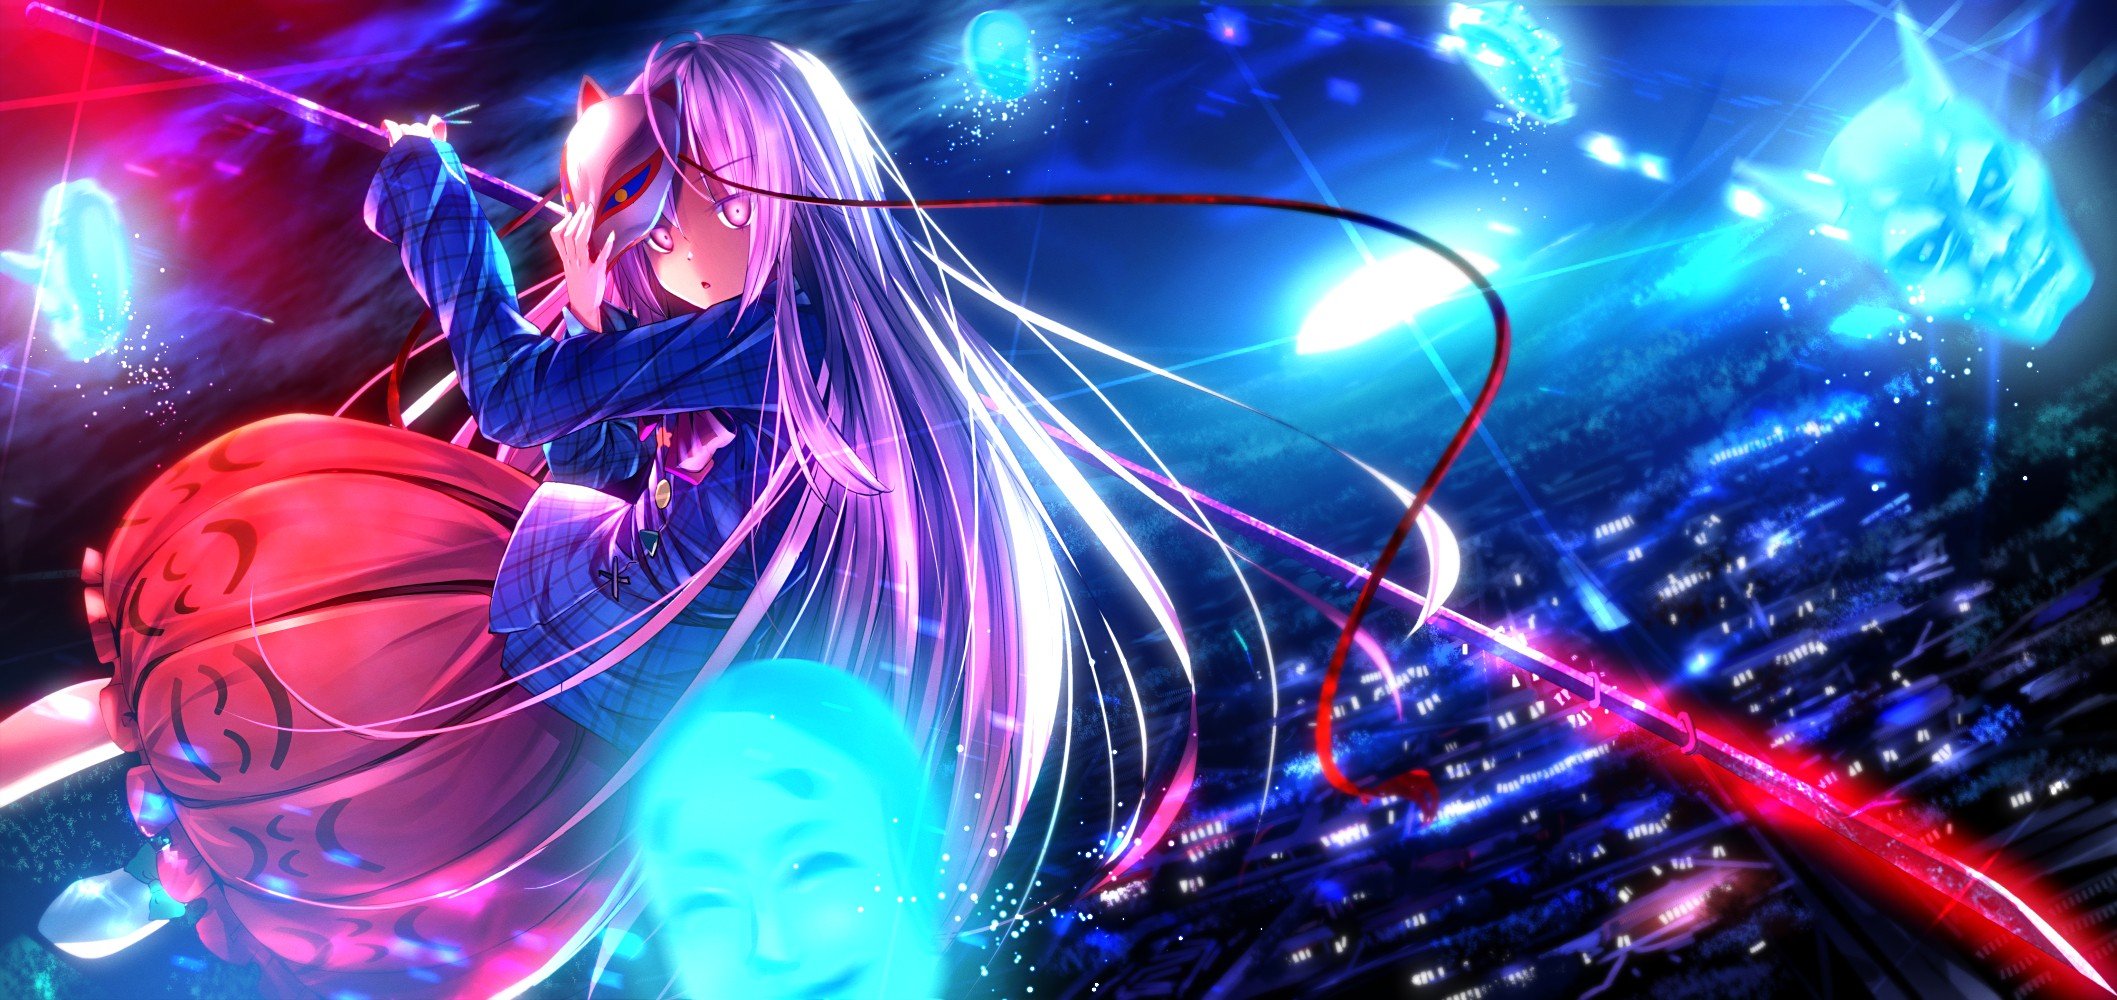 video, Games, Clouds, Touhou, Night, Flying, Moon, Skirts, Long, Hair, Ribbons, Weapons, Oni ...